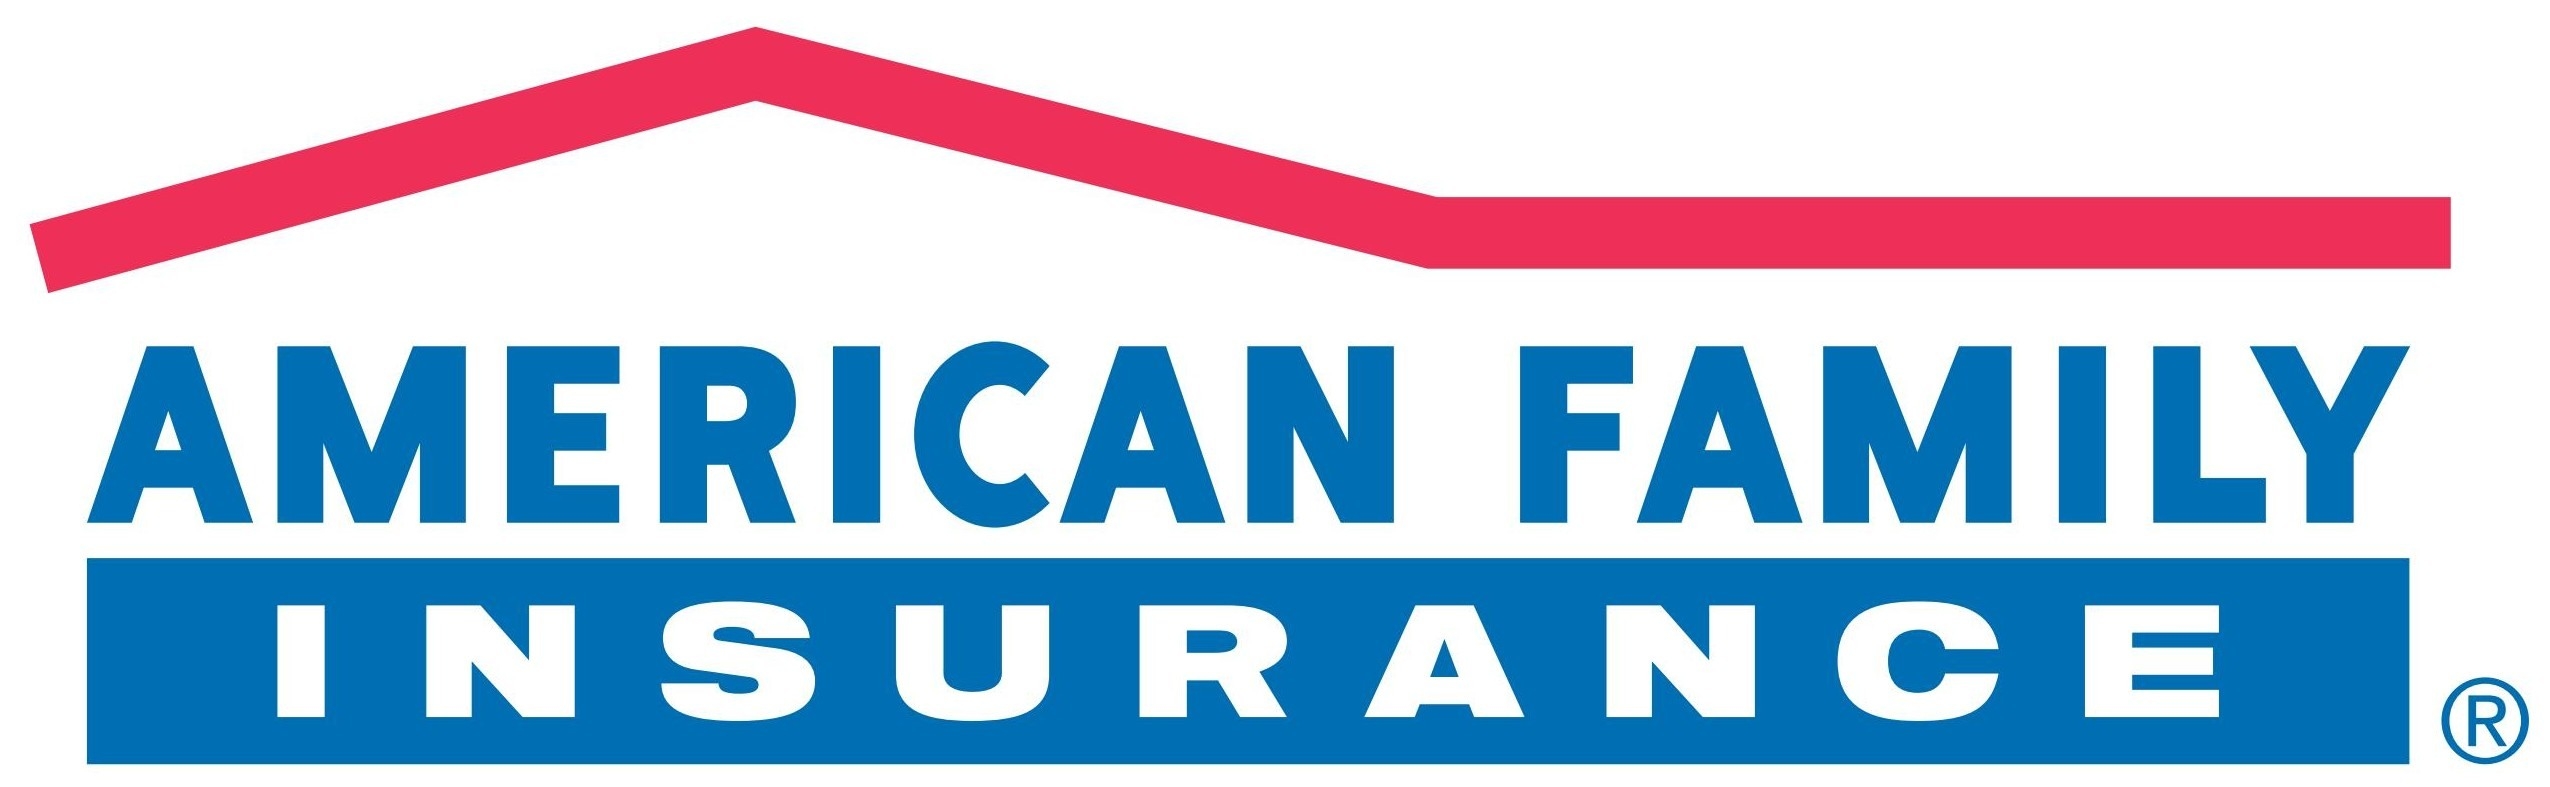 American Family Insurance – Her Madison Half Marathon &amp; 5K for American Family Insurance Logo Transparent - rudycoby.net